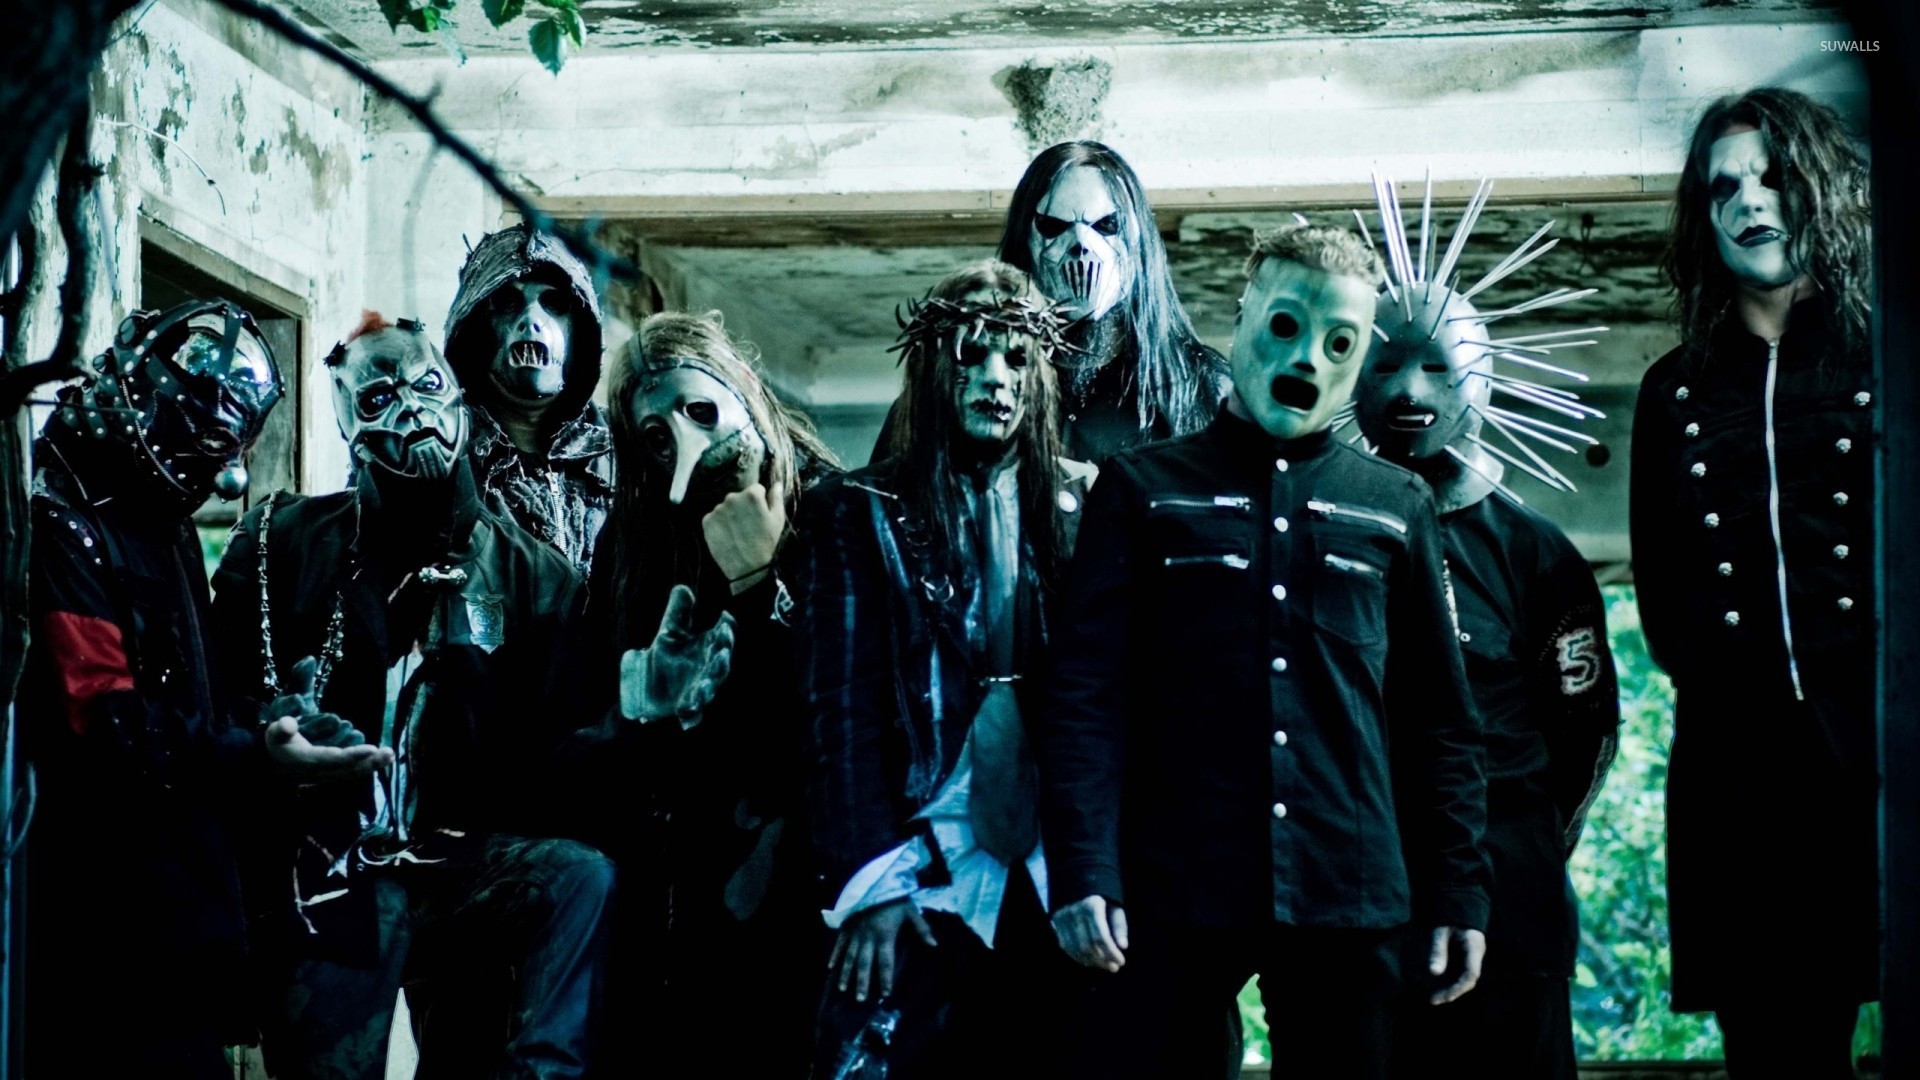 541527 1920x1080 slipknot hd widescreen wallpapers for laptop JPG 448 kB   Rare Gallery HD Wallpapers